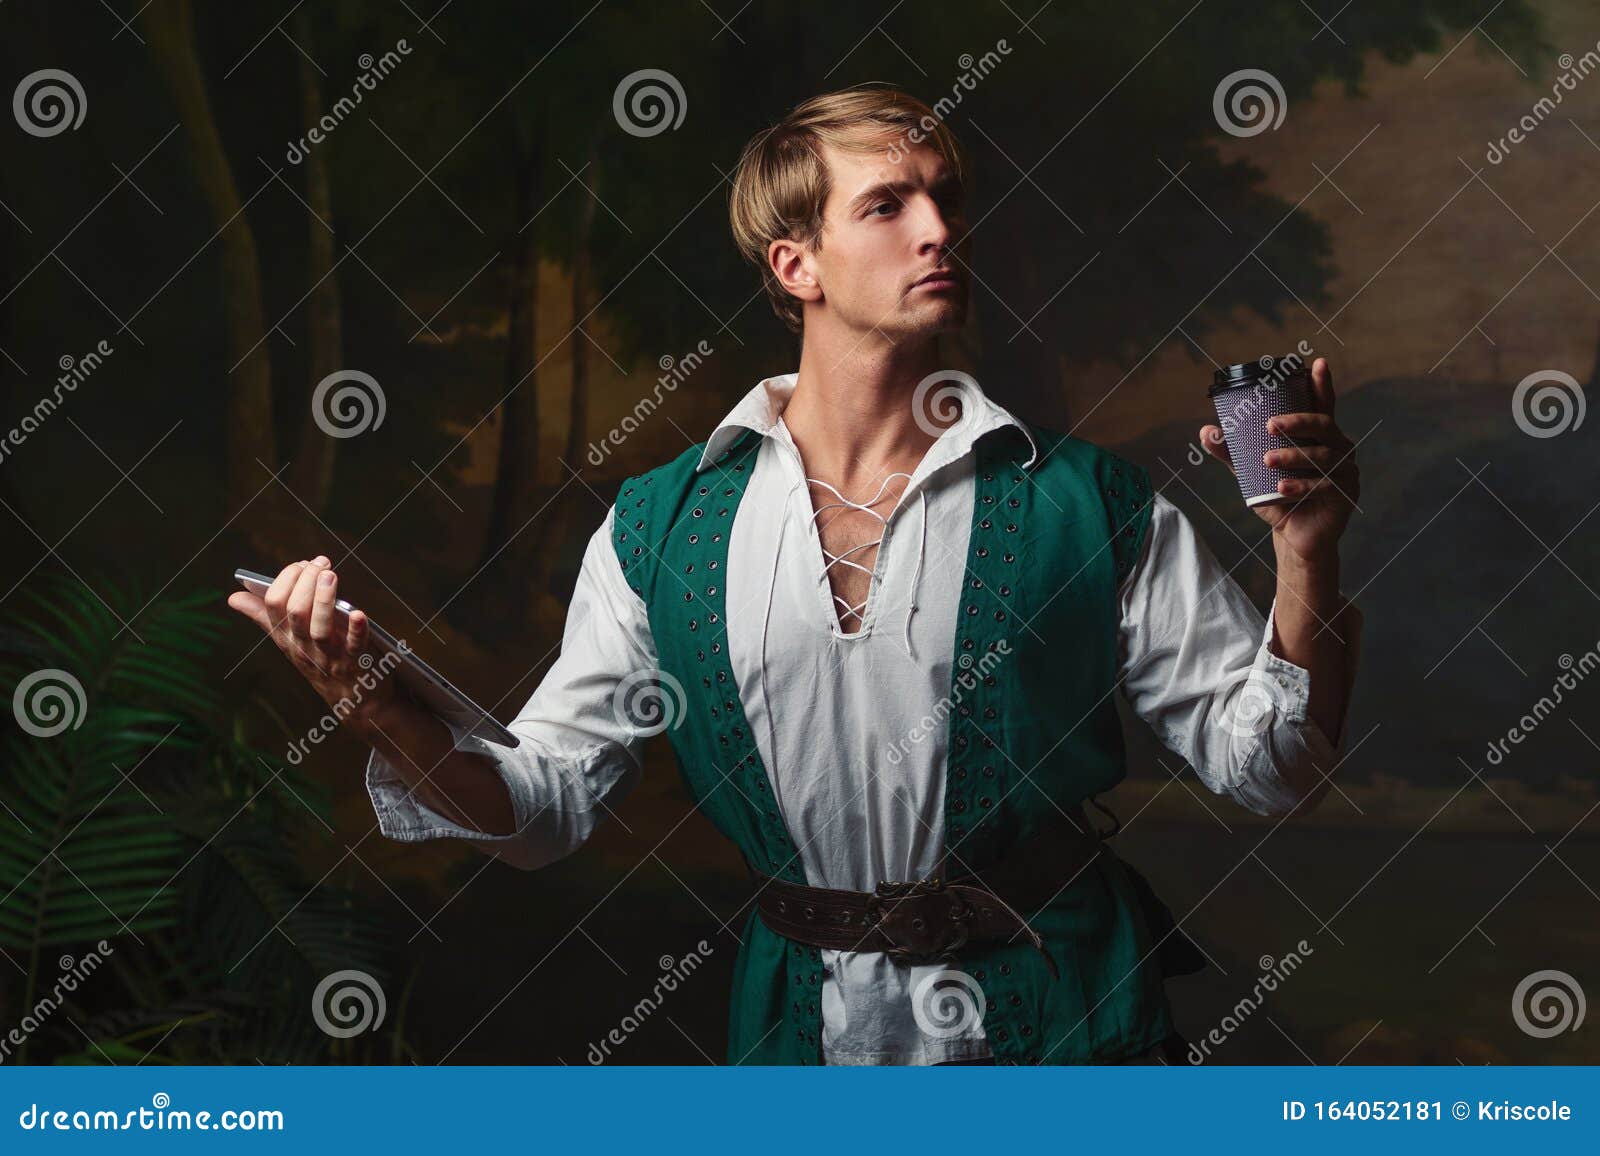 young man in renaissance style uses gadgets.